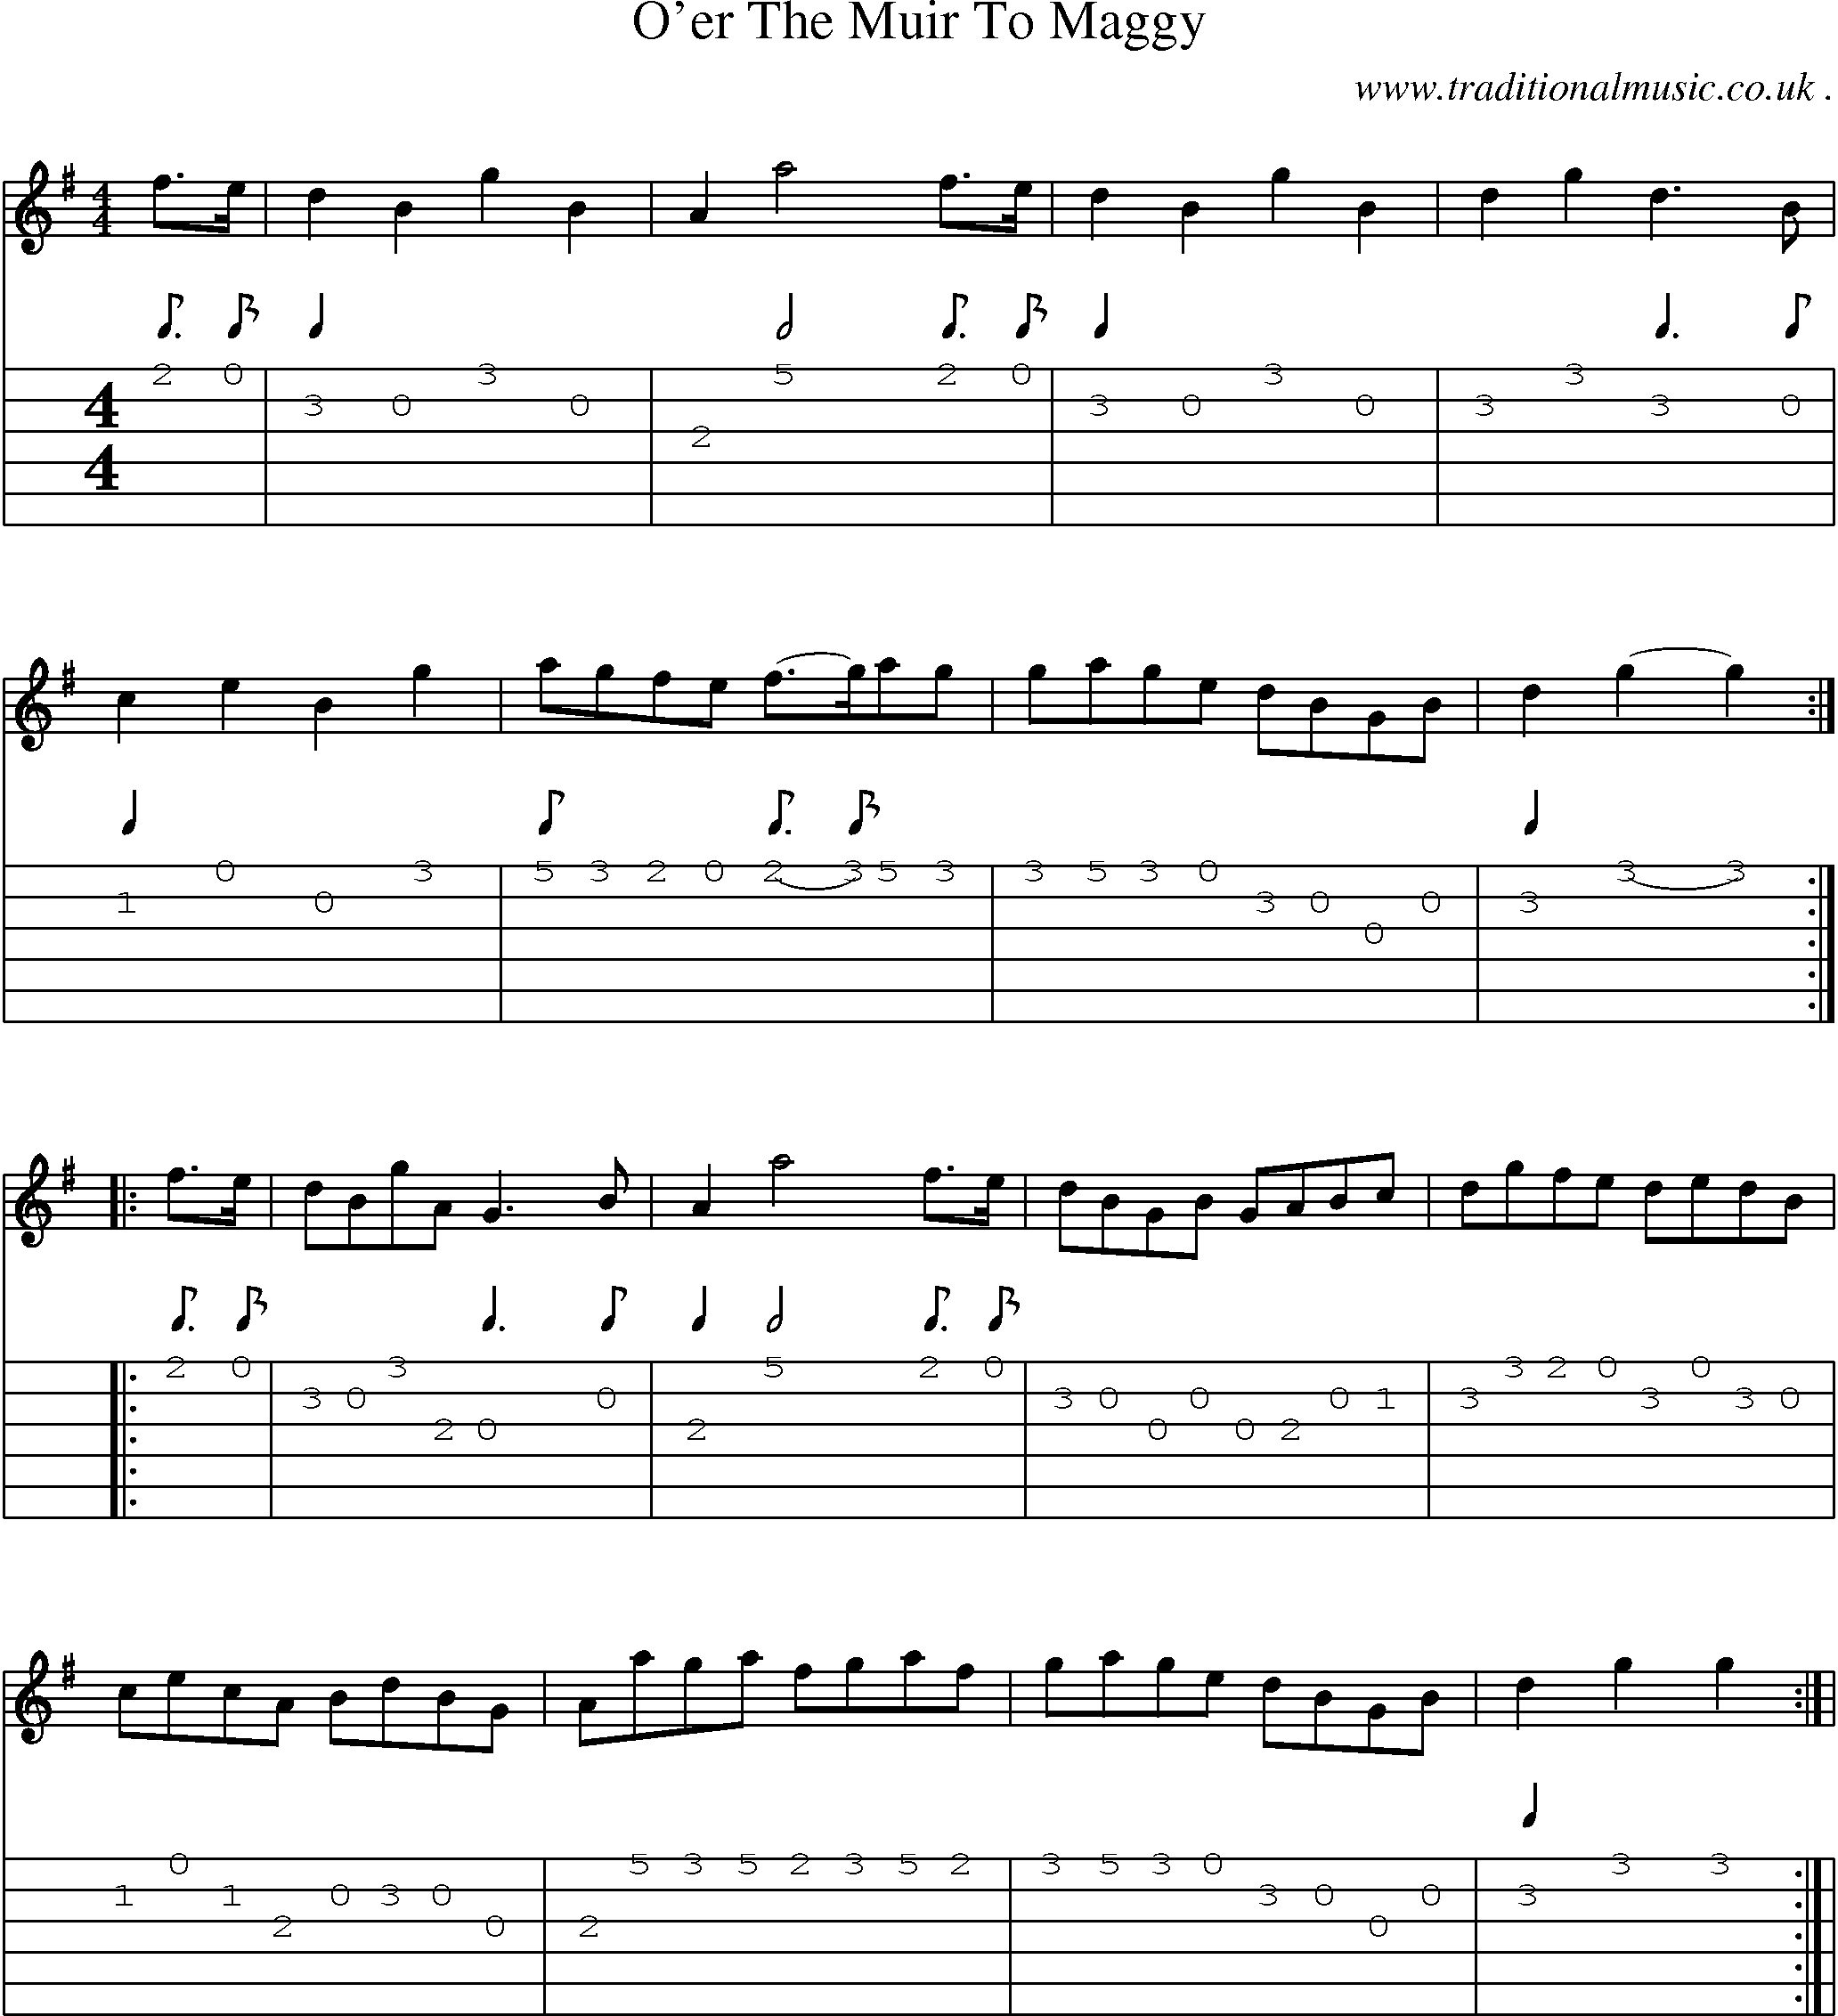 Sheet-Music and Guitar Tabs for Oer The Muir To Maggy